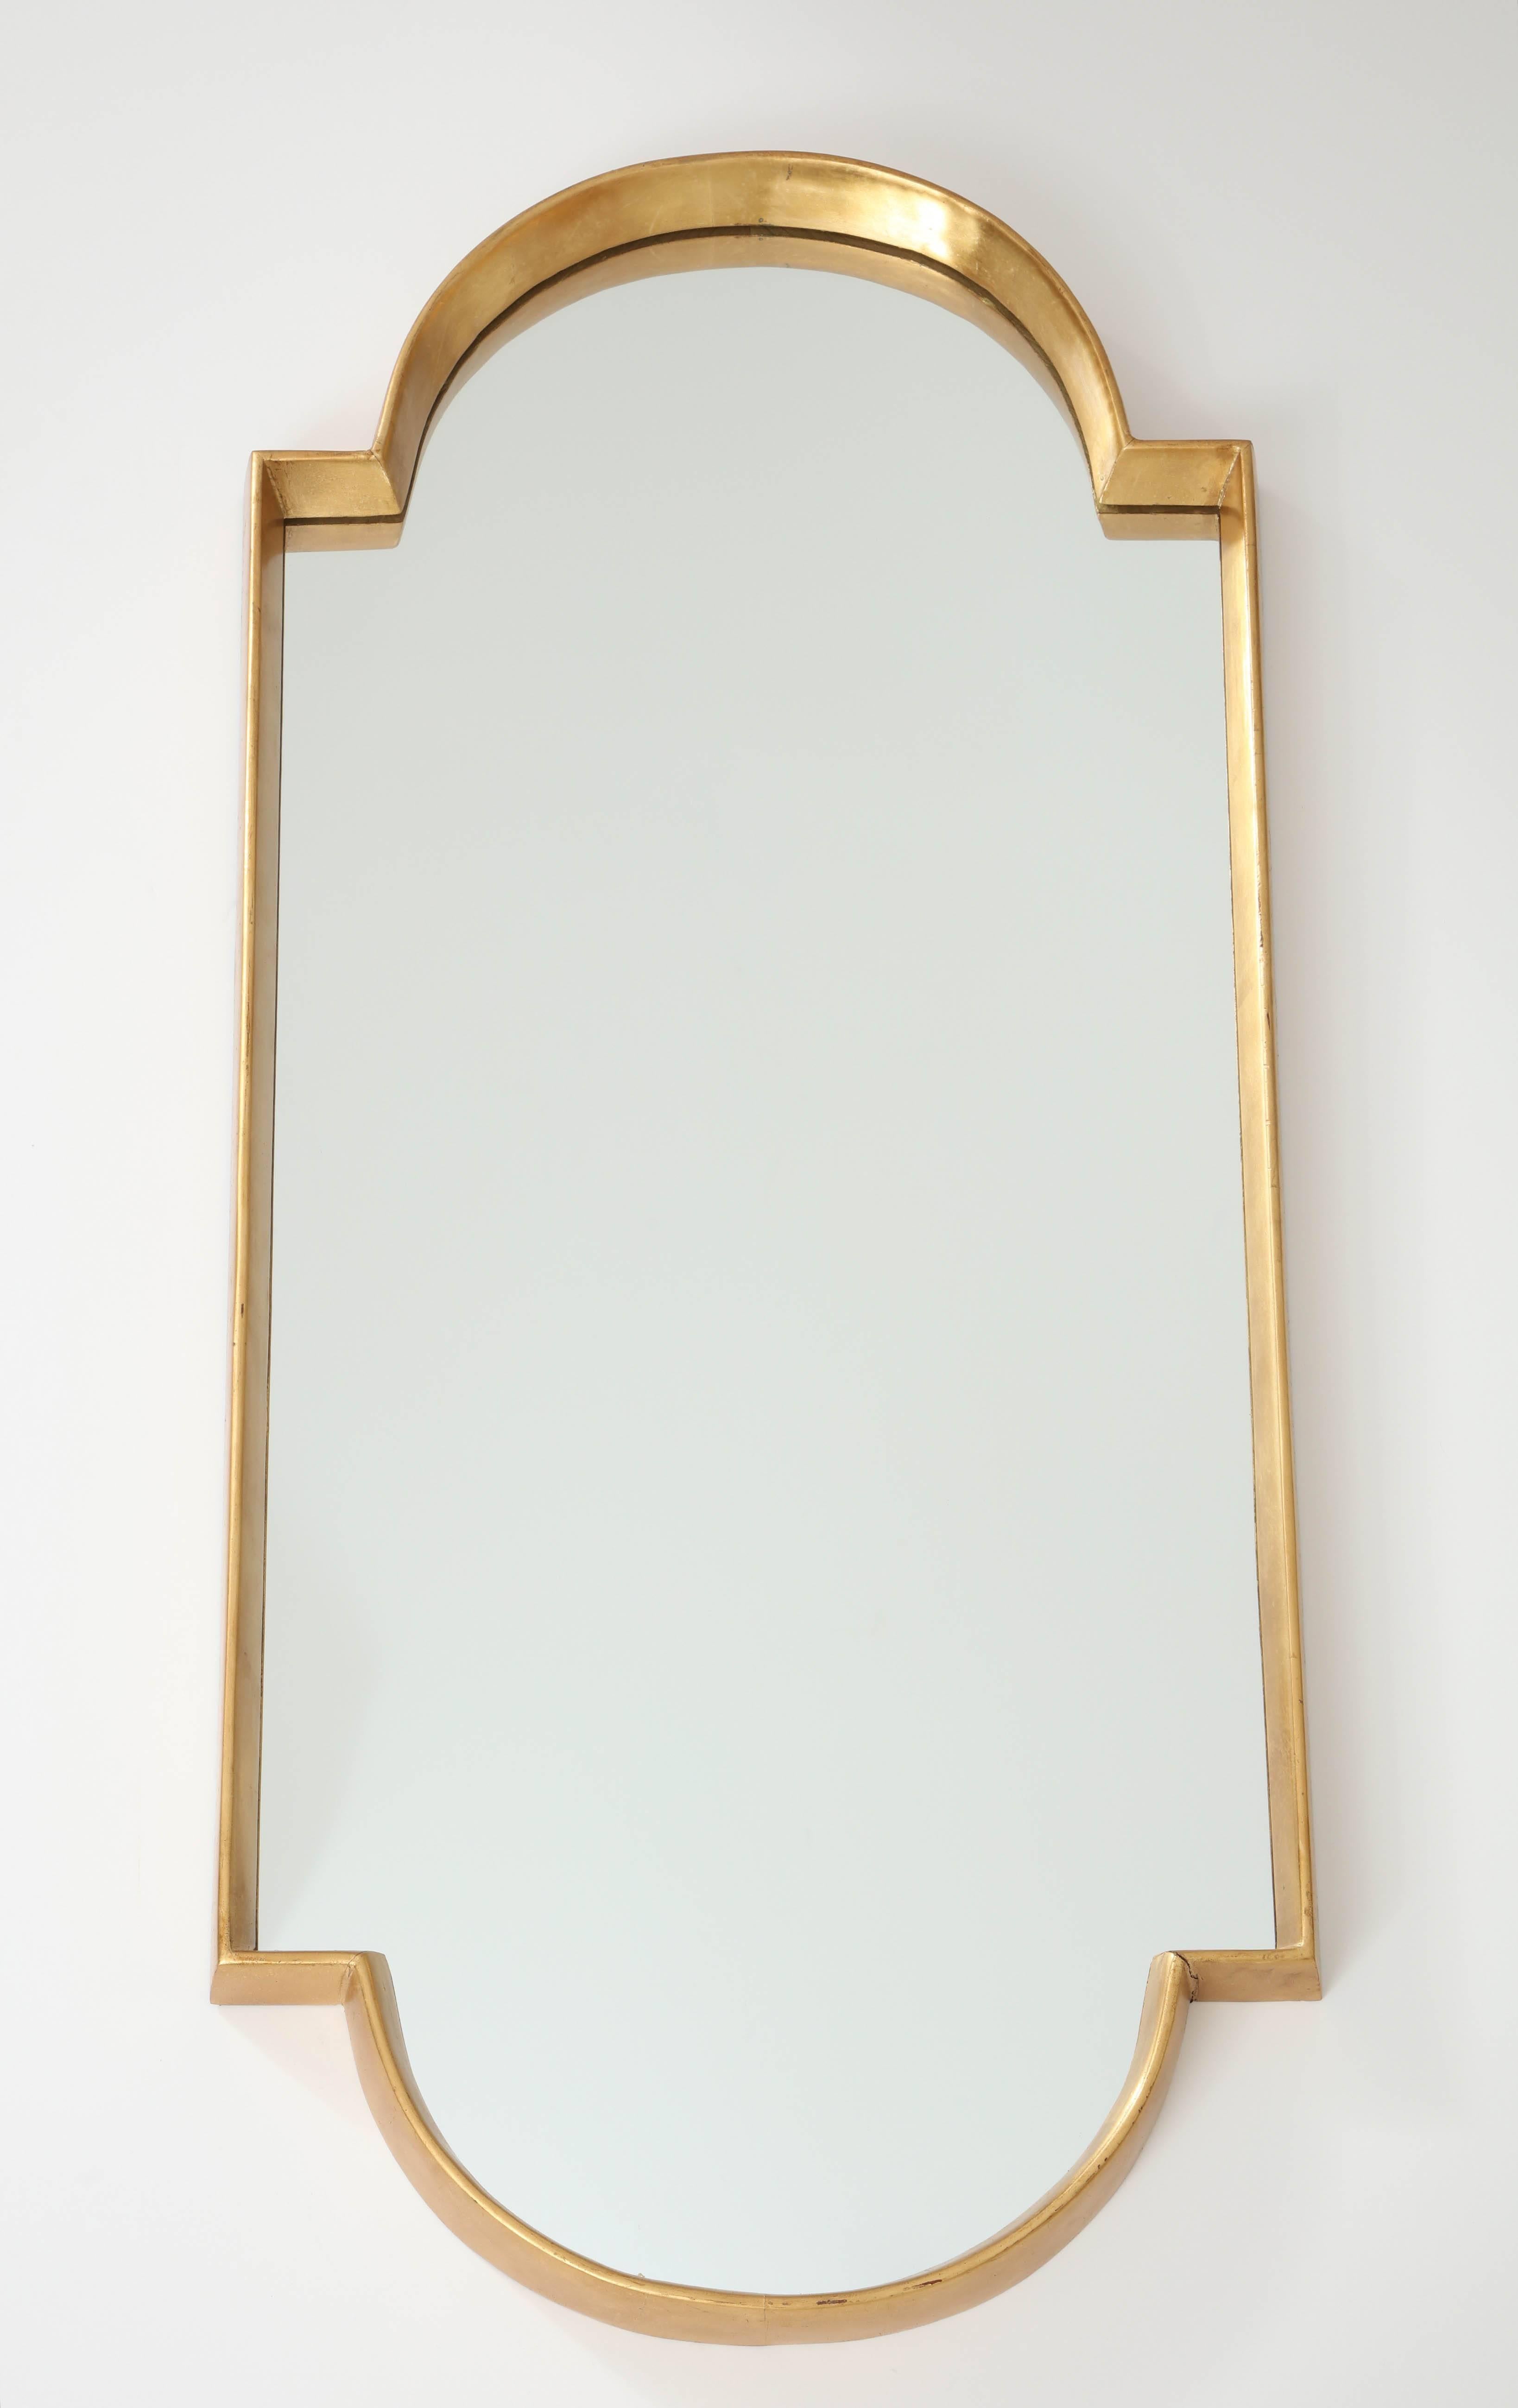 Mirrors, pair of tall gold leaf mirrors. Pair of decorative gold leaf mirrors. Handcrafted by a local crafts person in the New York area. Based on a 1950s mirror design. We have them in stock.
The mirrors are made of wood. The gold leaf is handmade.